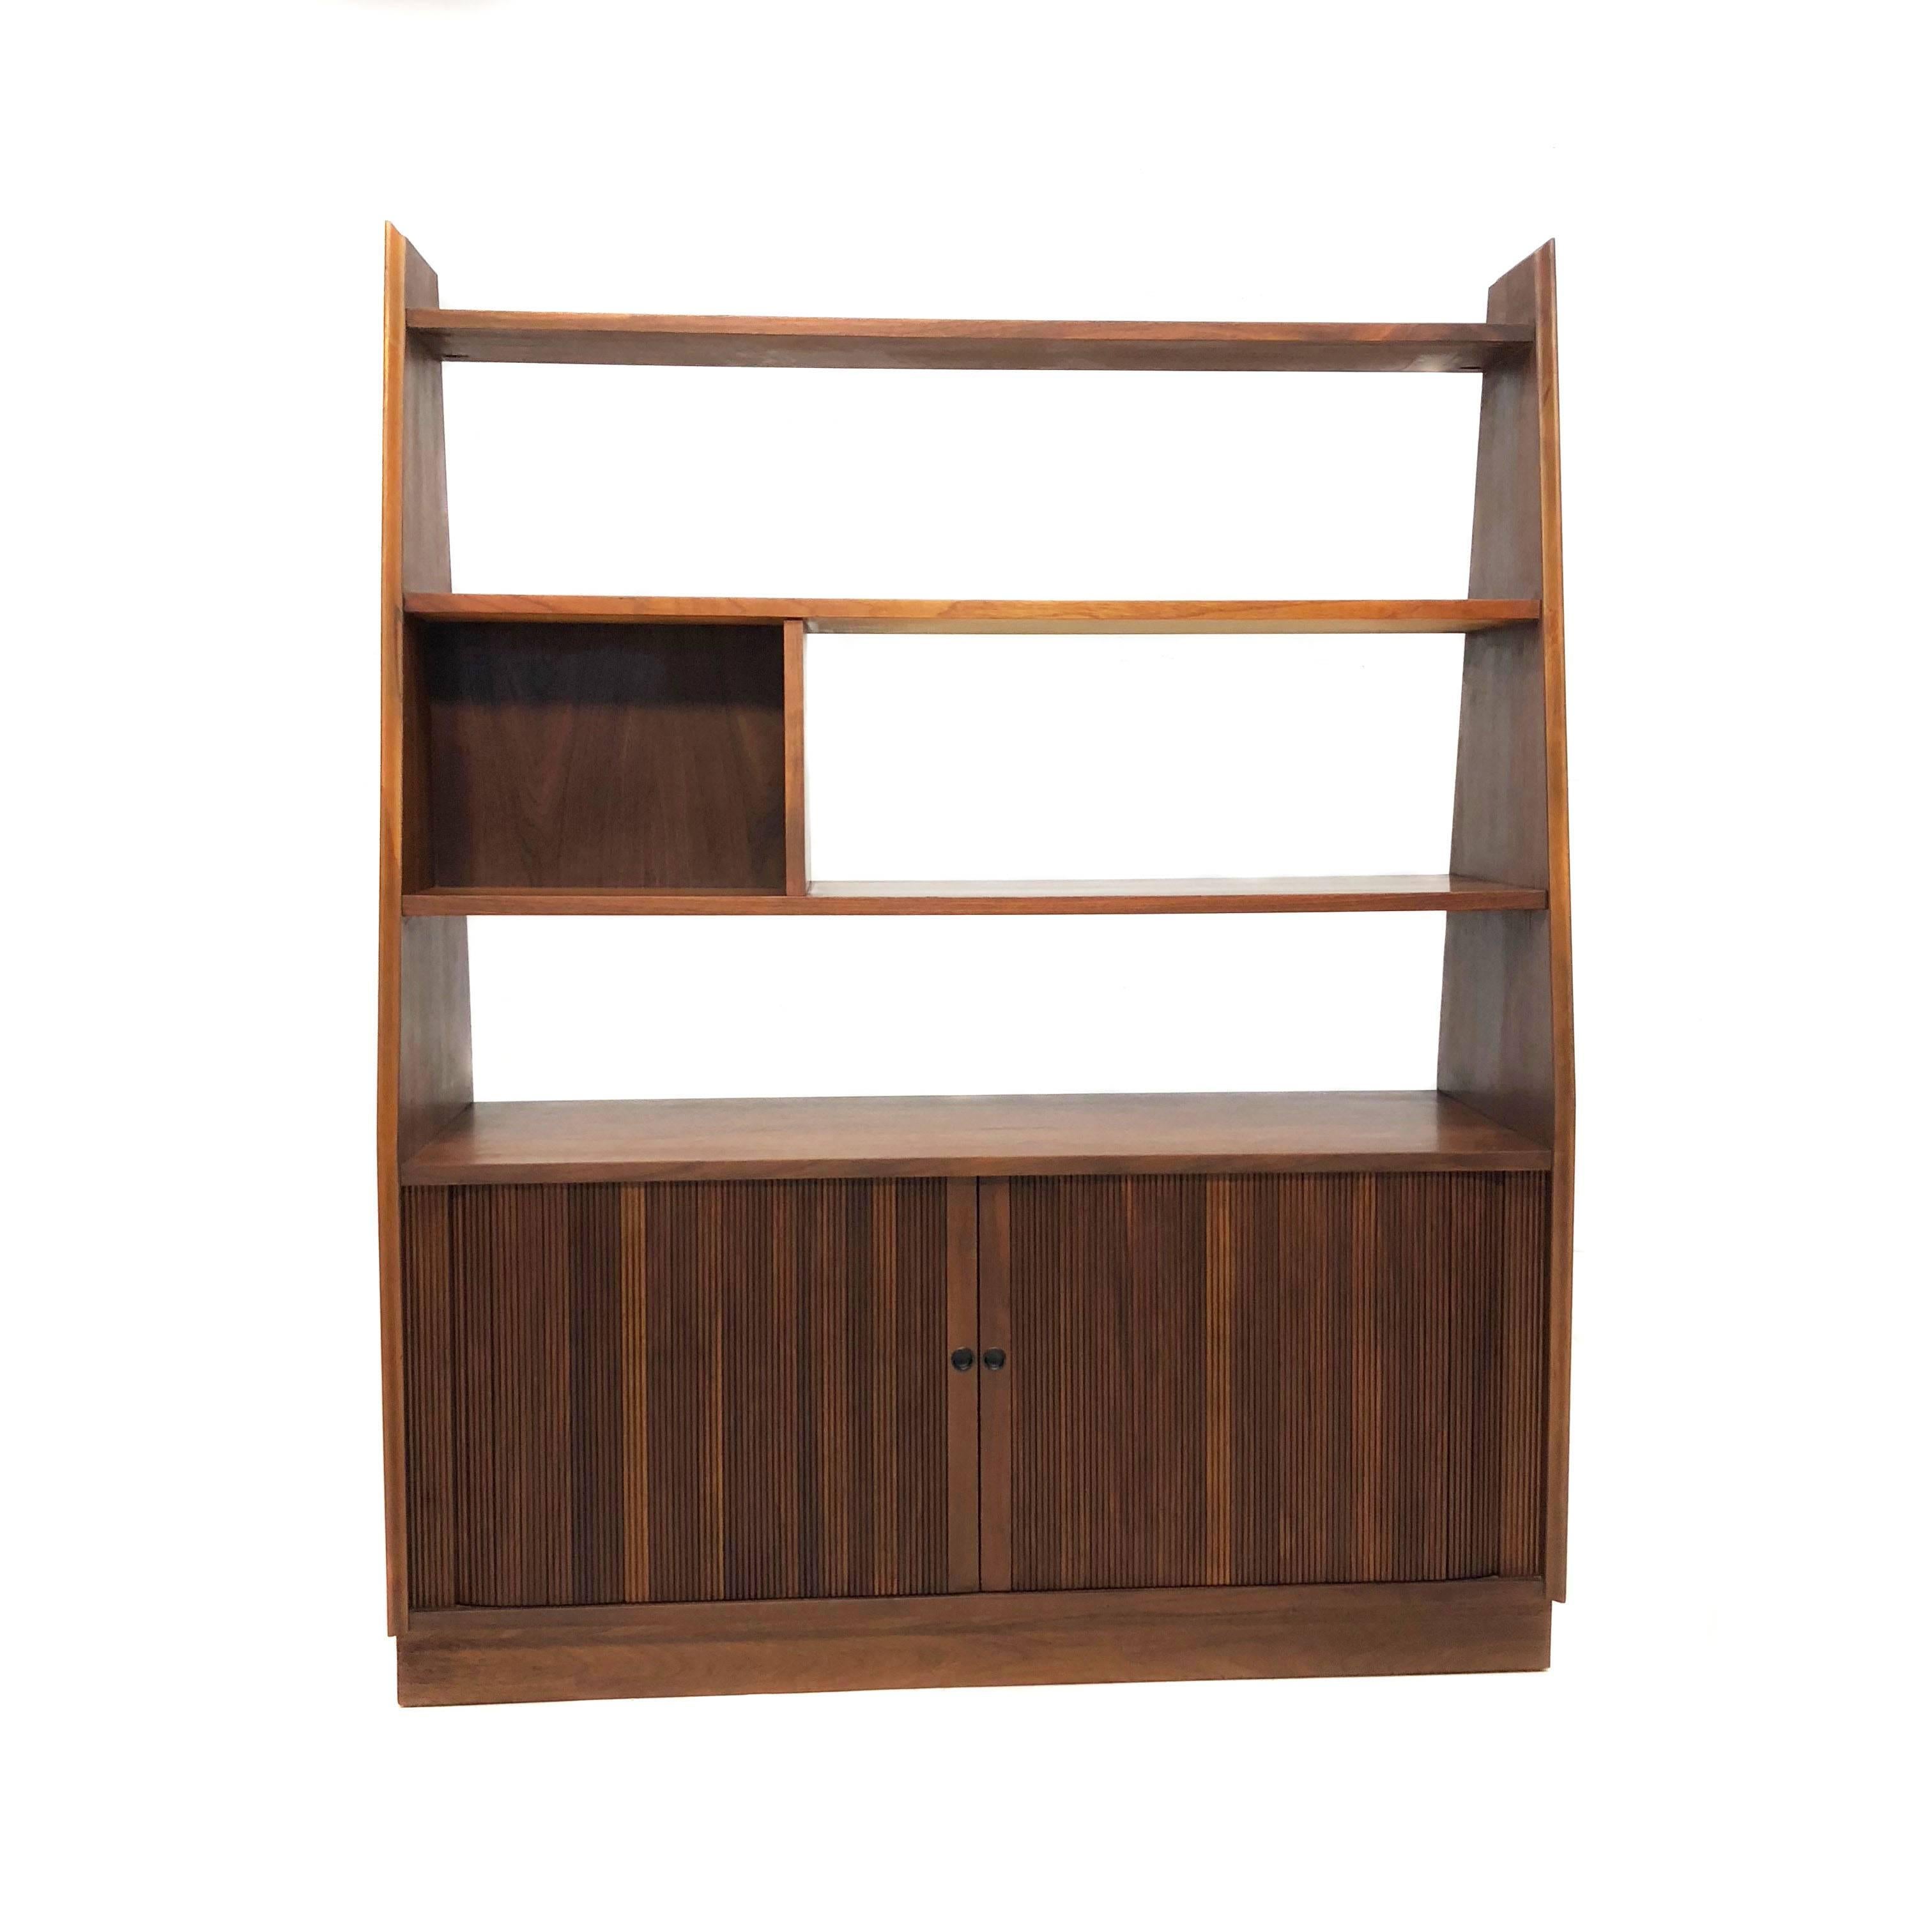 Beautiful Mid-Century Modern walnut bookshelf and room divider with lower tambour door for album storage. In excellent condition with age appropriate wear.

Measurements: 48